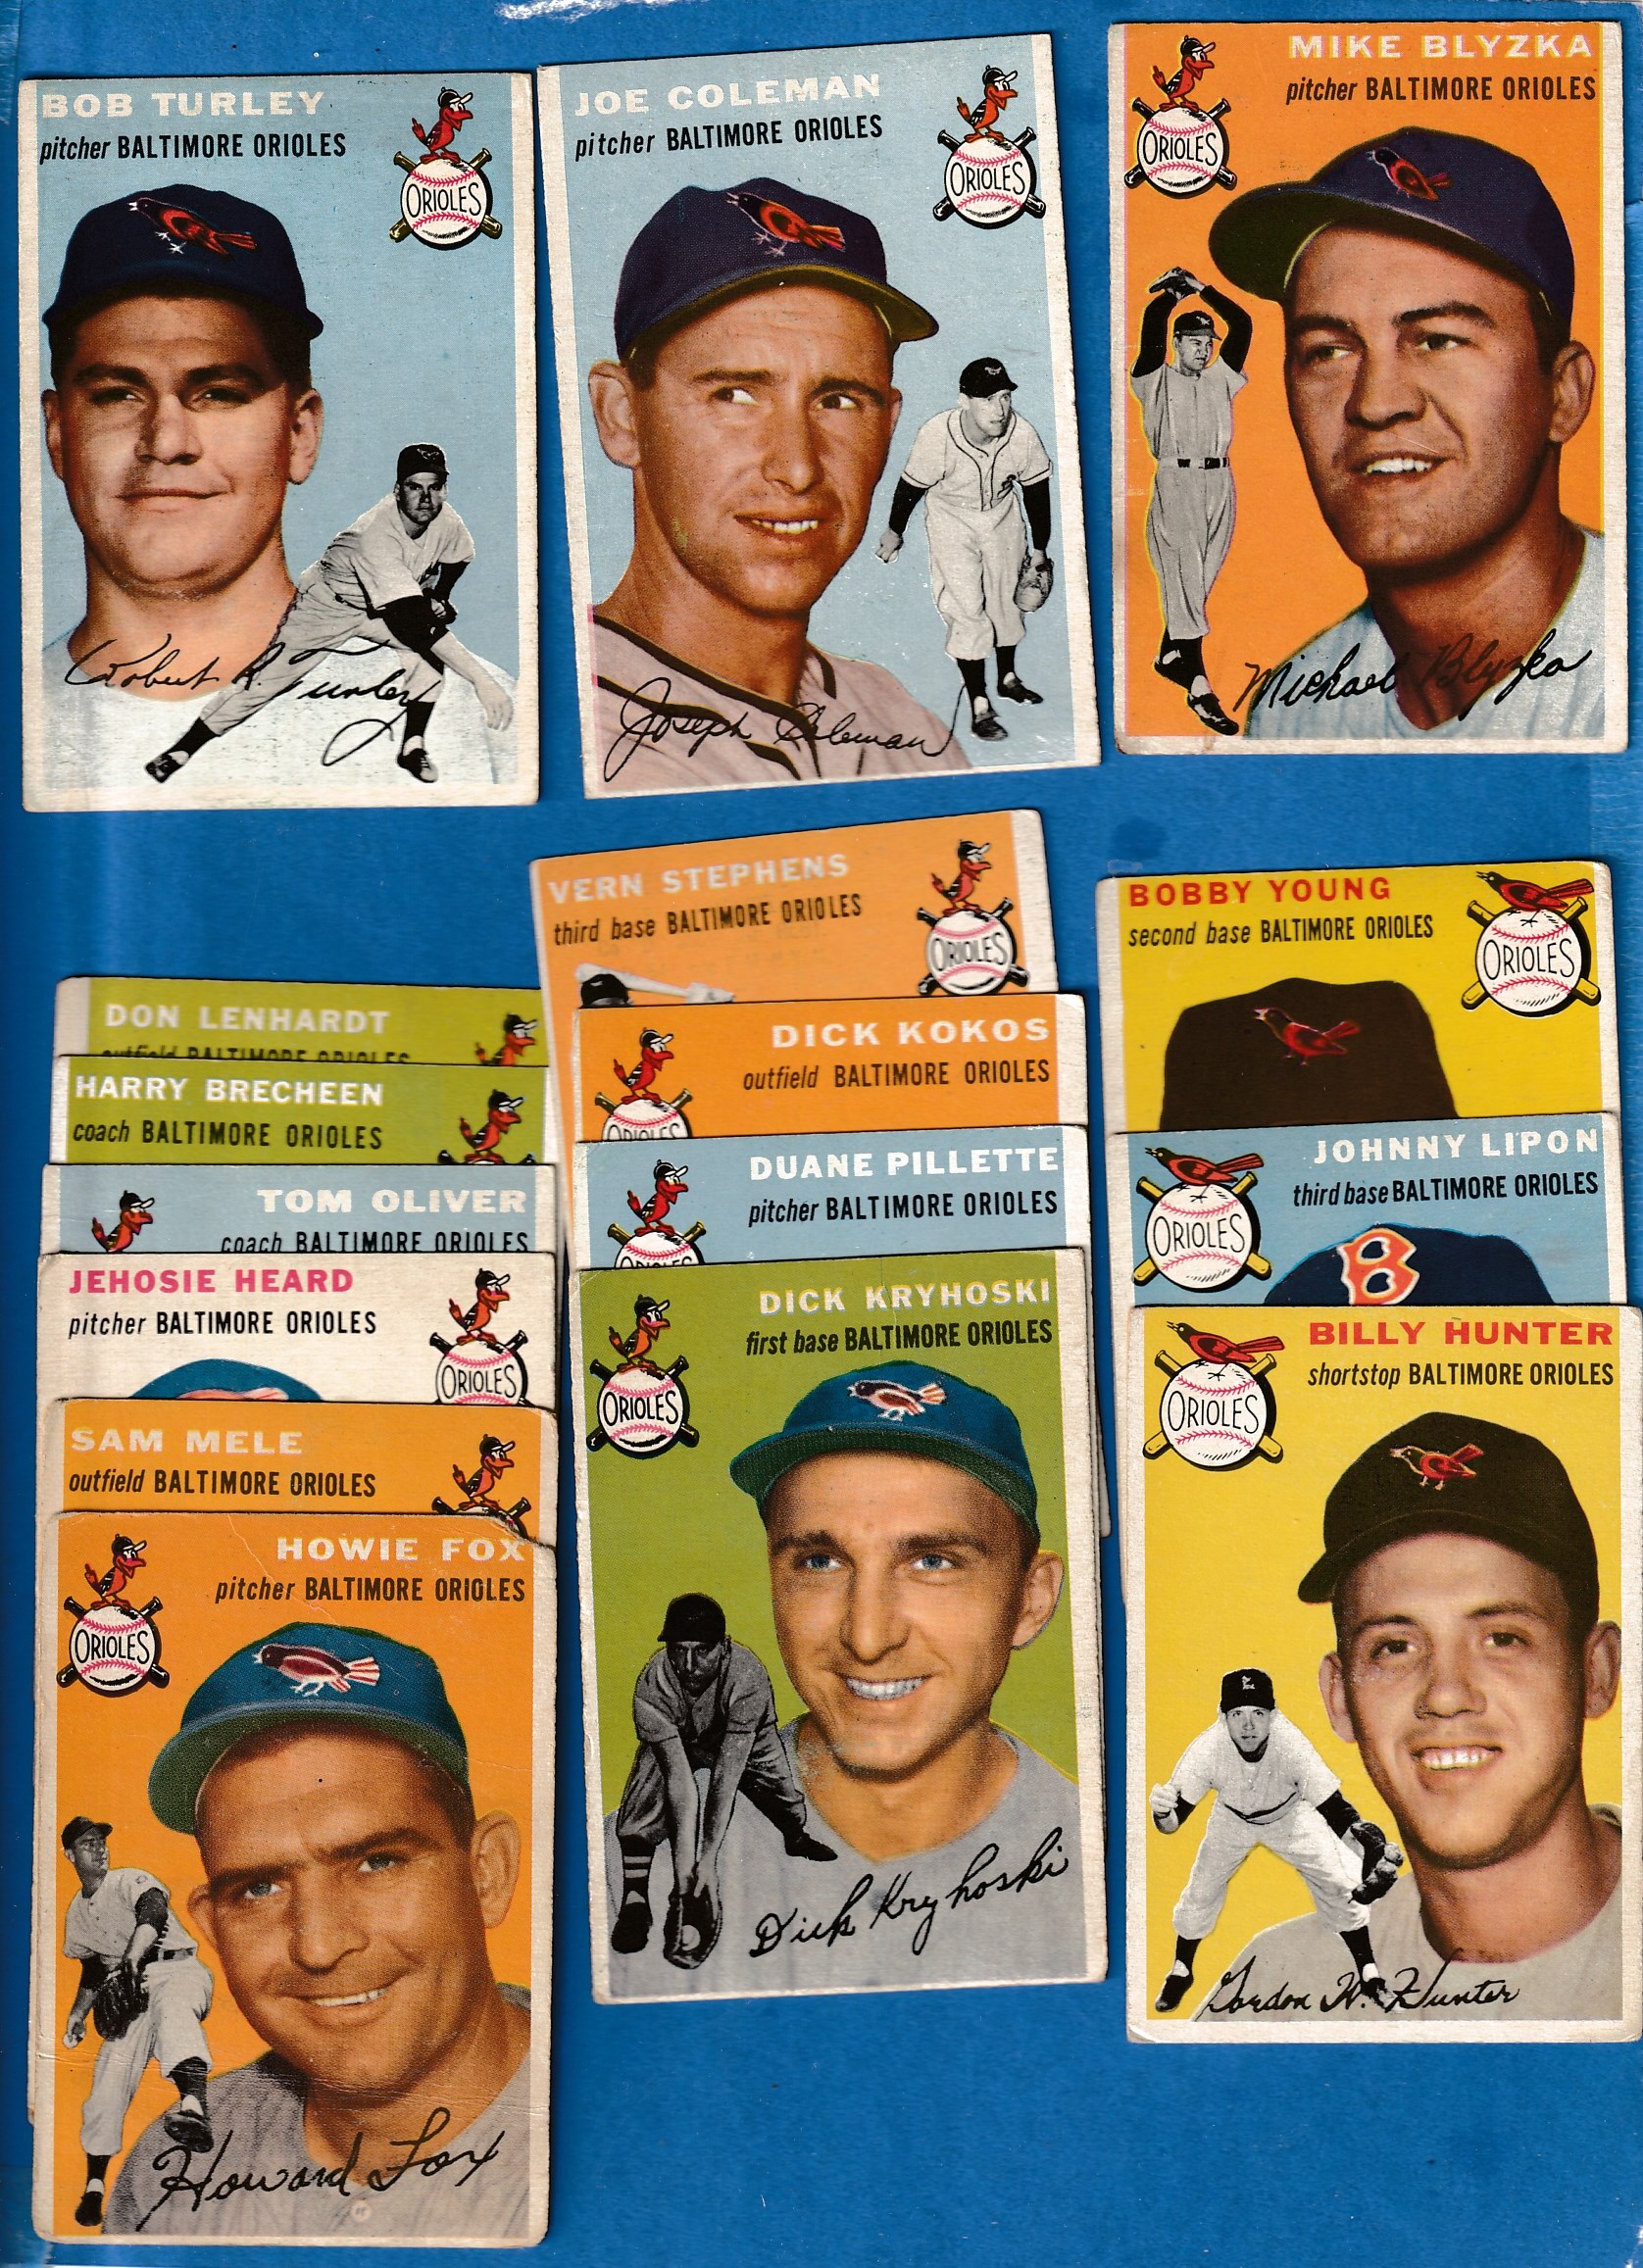  Baltimore Orioles - 1954 Topps Near Complete Team Set (14/15 cards) Baseball cards value